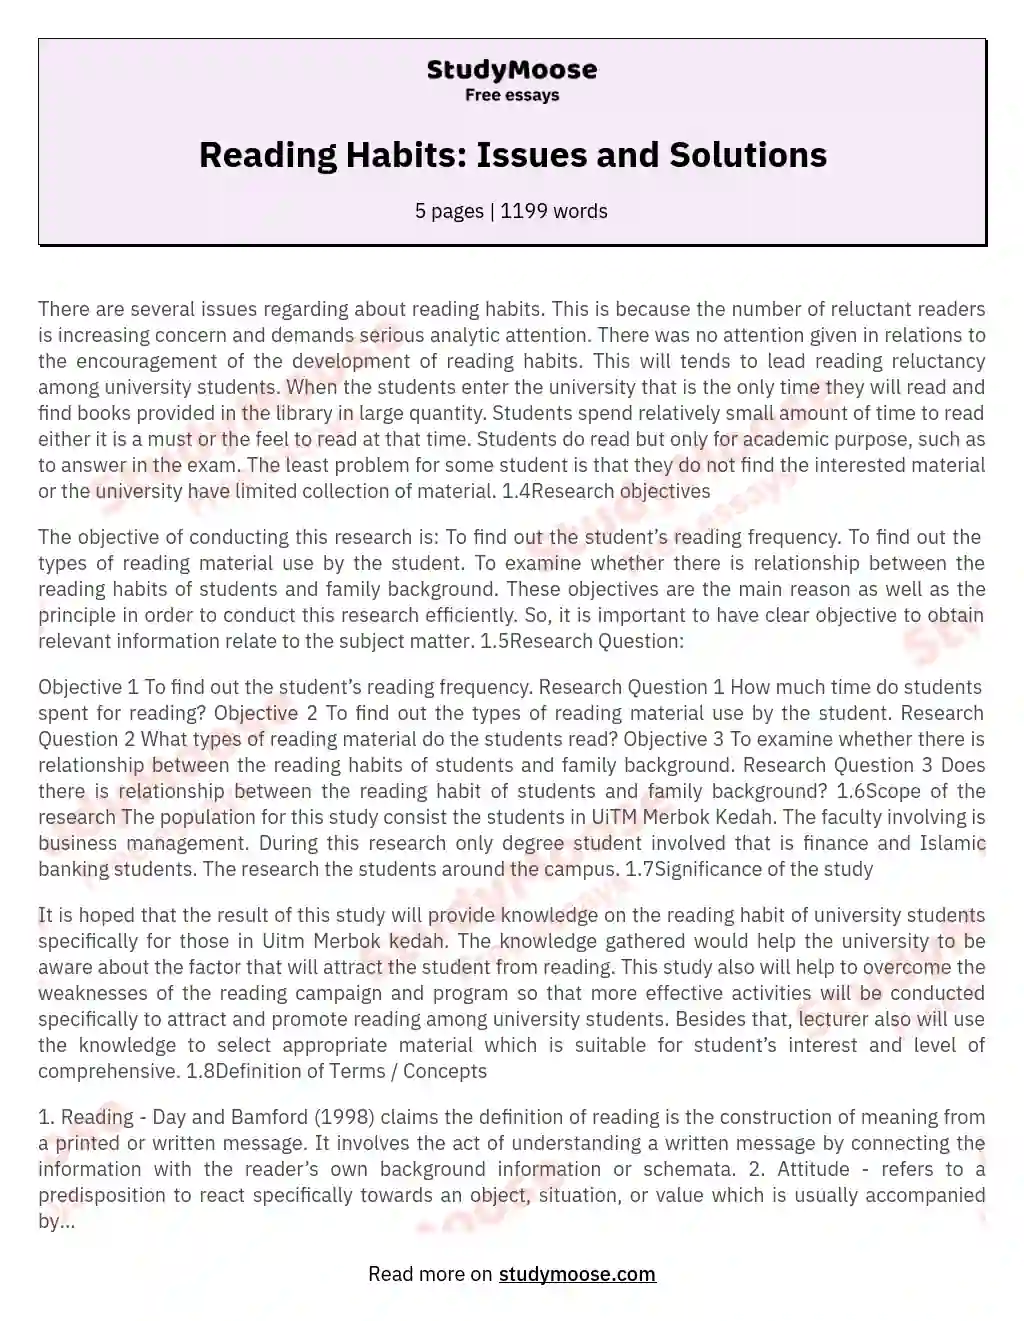 Reading Habits: Issues and Solutions essay